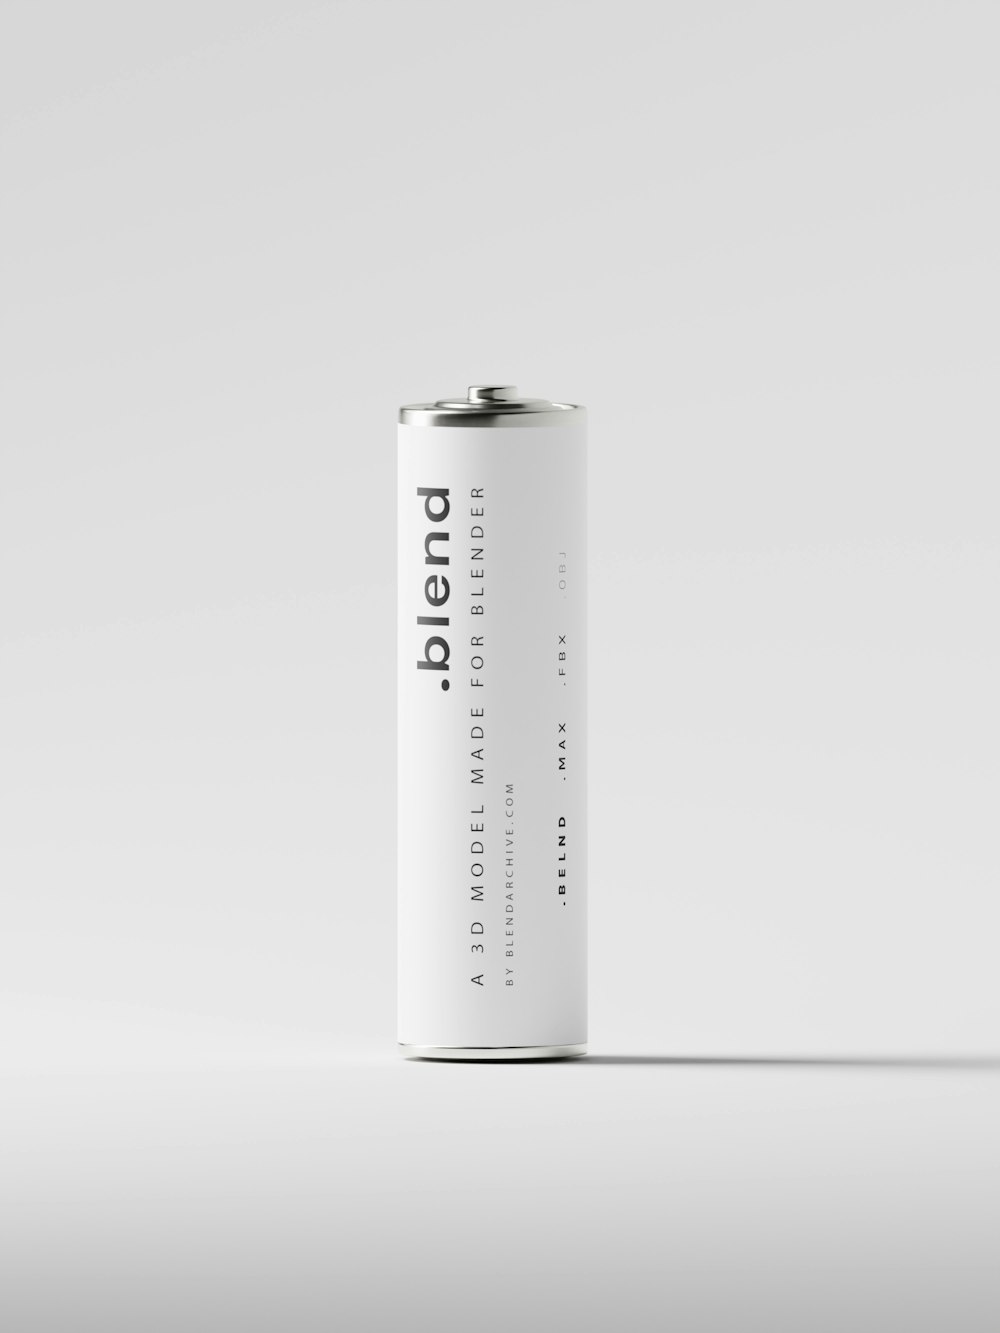 a can of soda on a white background